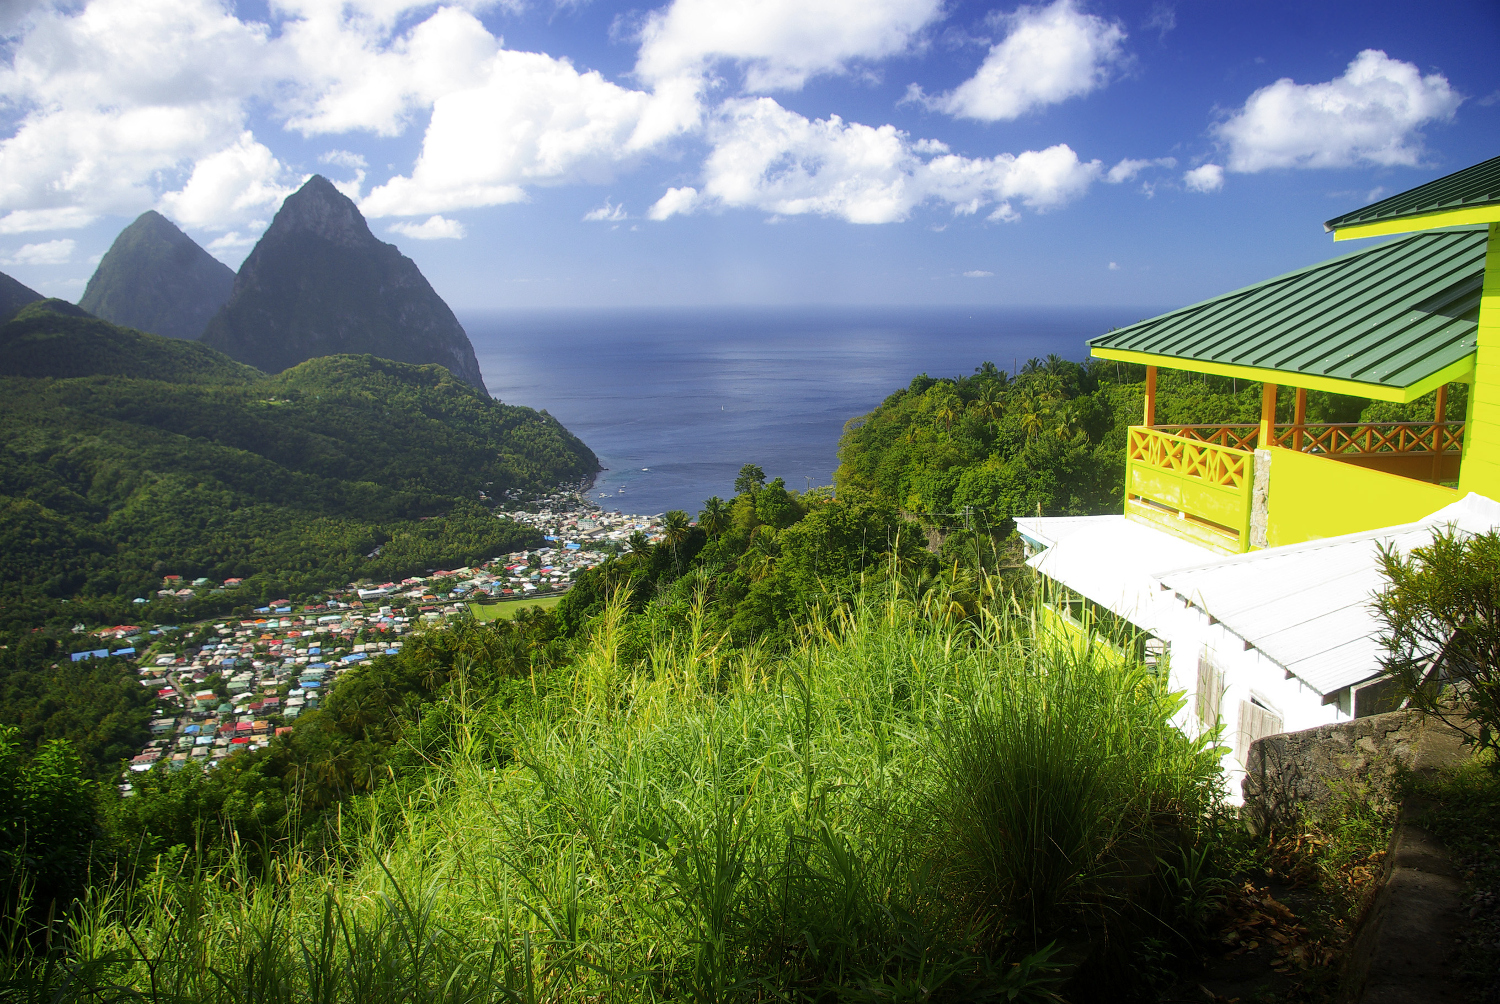 The twin cones of St Lucia's Pitons are a national symbol. Image by Benjamin Howell / iStock / Getty